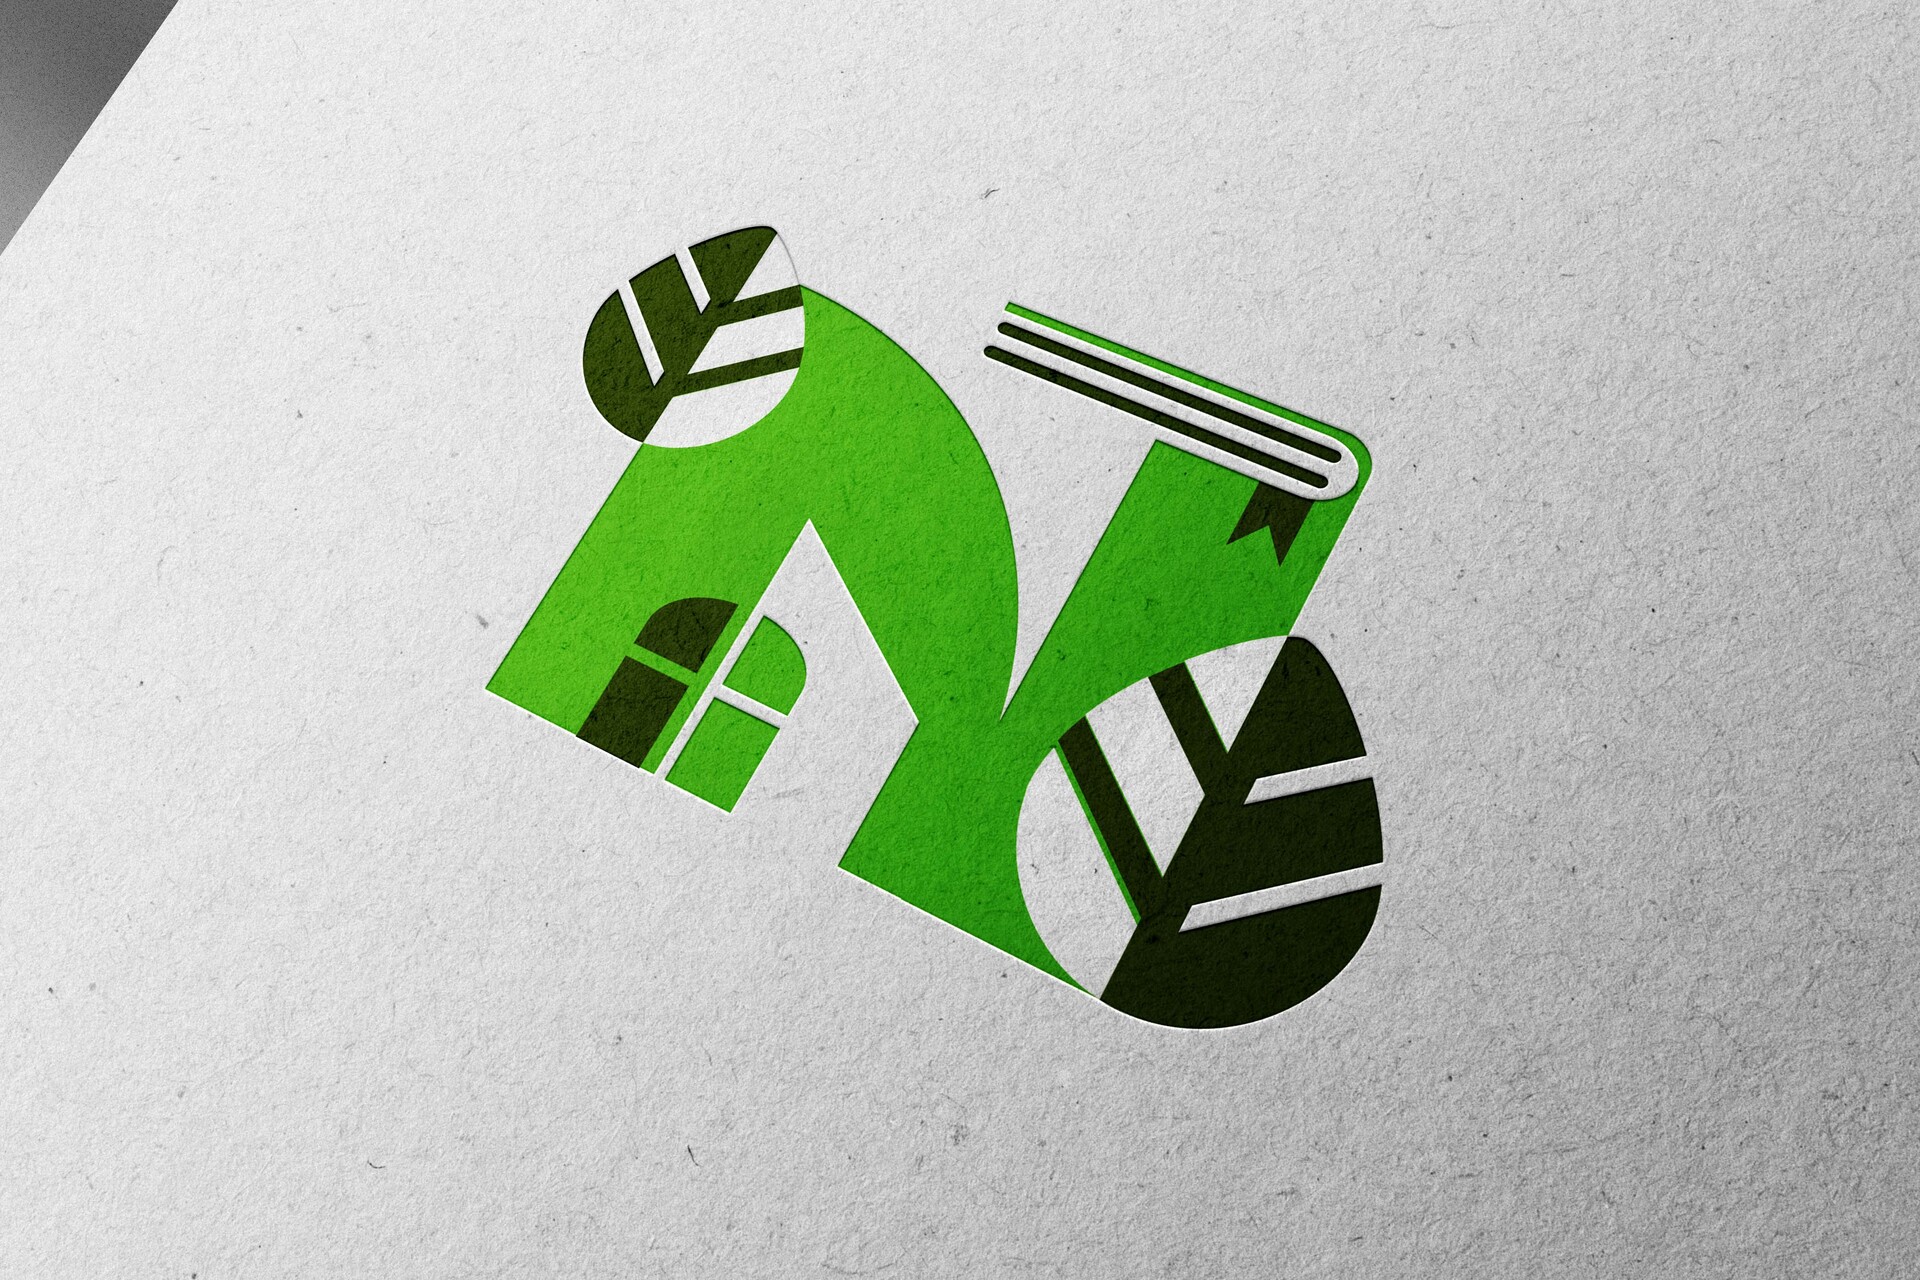 Top 10 Environment & Green Logo Designs that Never Fail To Inspire